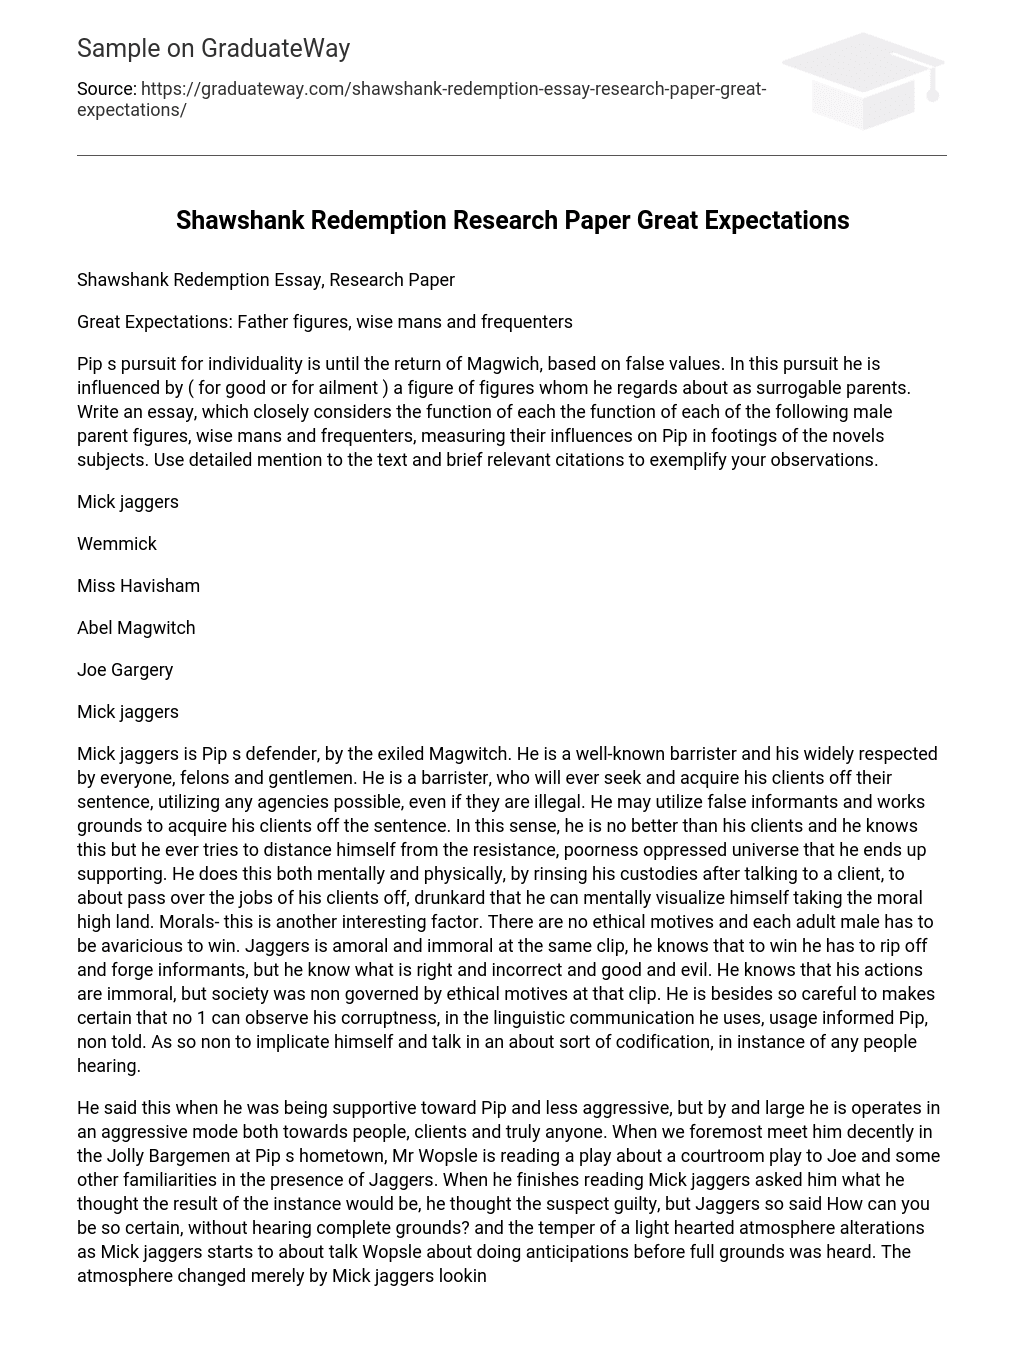 Shawshank Redemption Research Paper Great Expectations